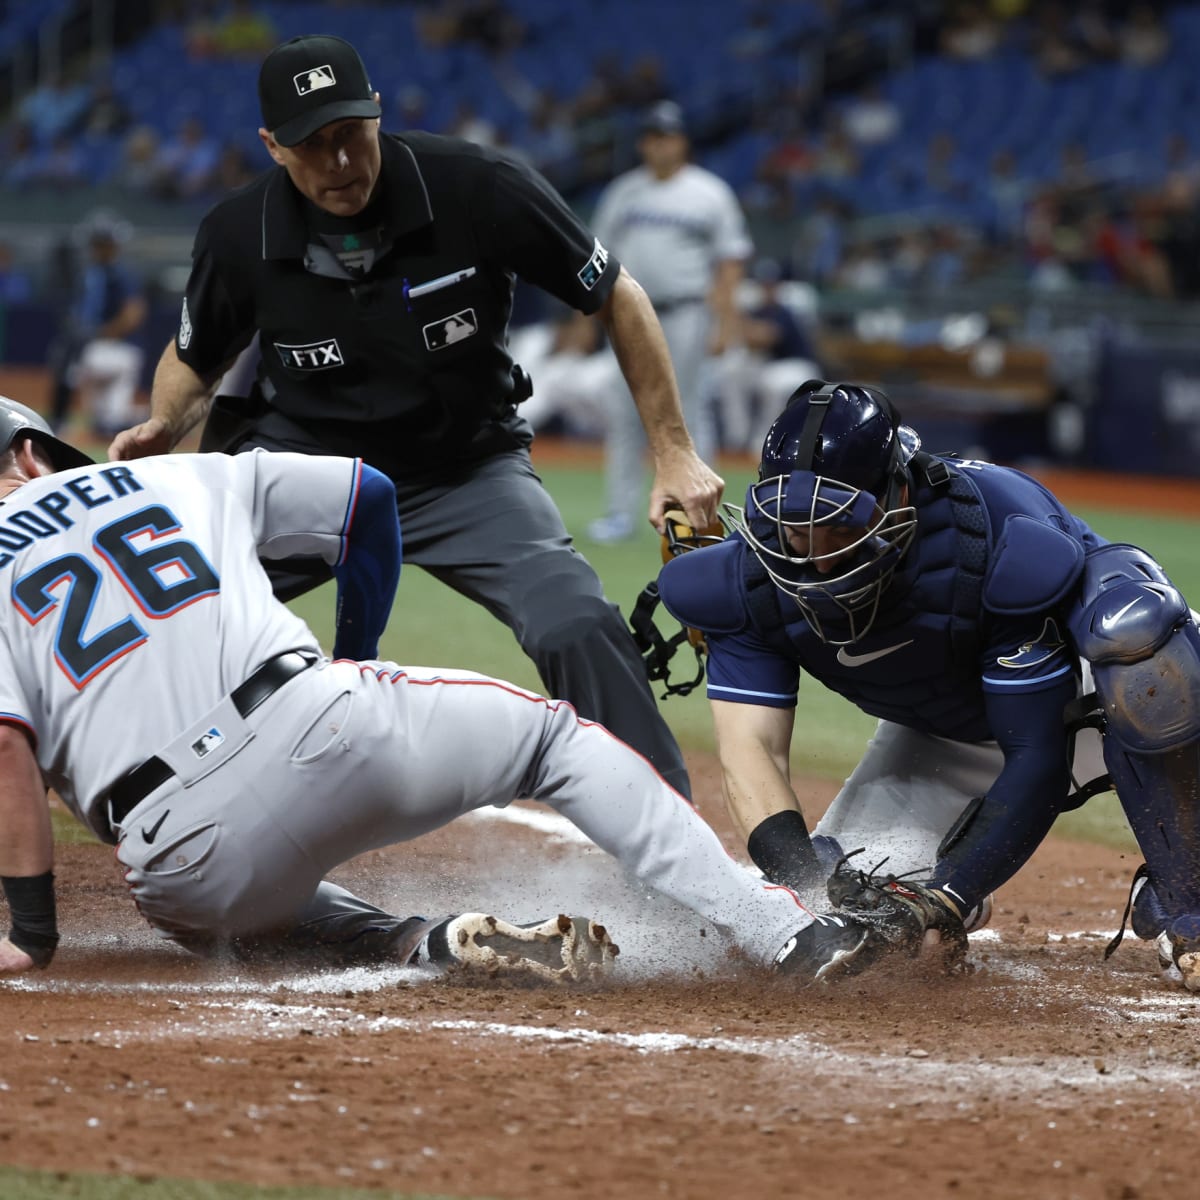 Tampa Bay Times] Kevin Kiermaier on Rays' strong start, loving